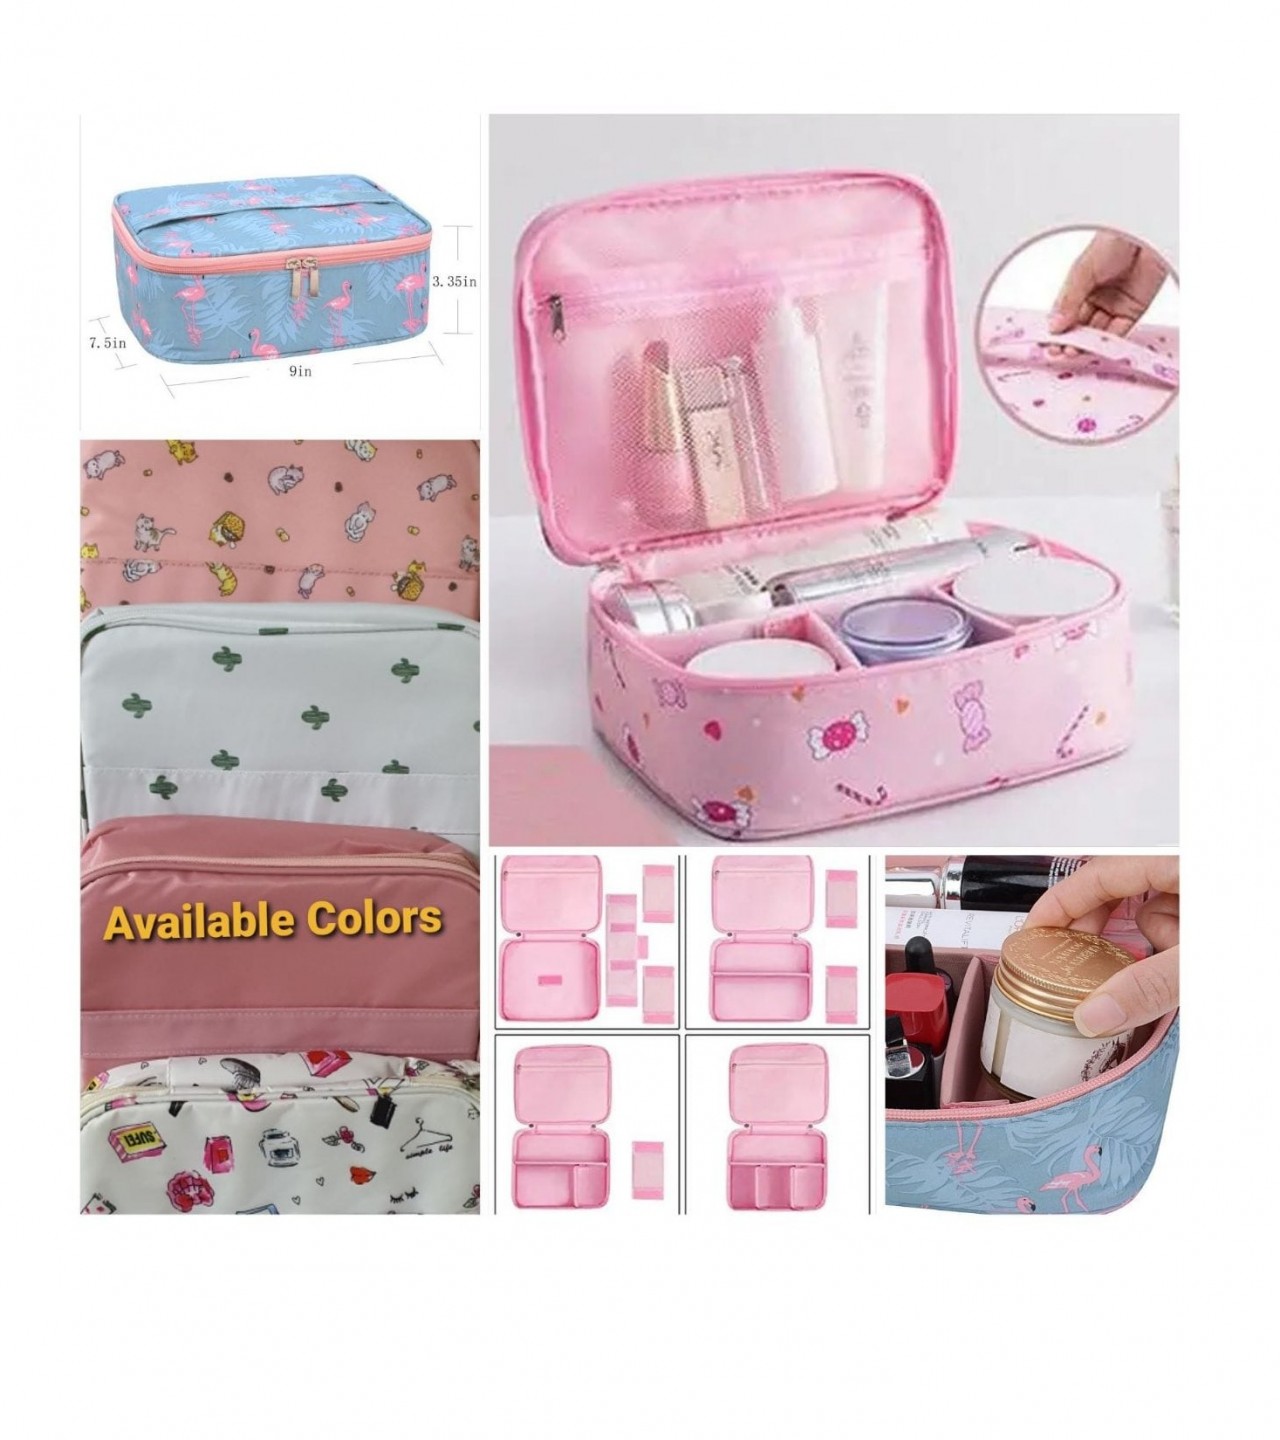 Portable Makeup Cosmetic Case with Adjustable Dividers for Cosmetics Makeup Brushes Women - Multi